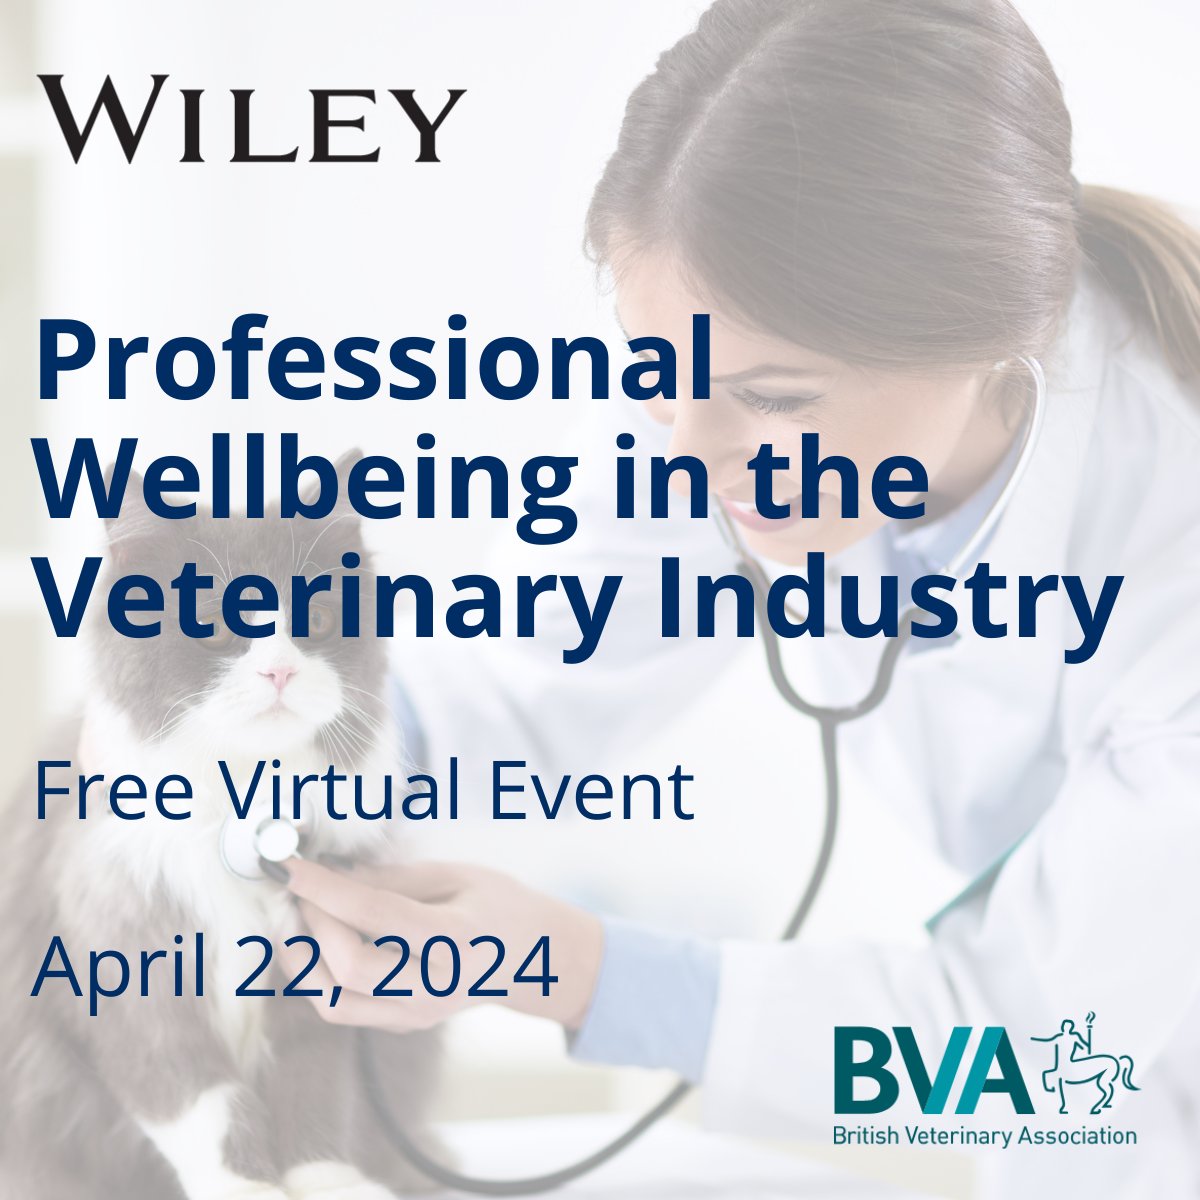 Professional wellbeing is an area of concern for many in the industry. Join @BritishVets @thebsava and @BEVA_news for a free virtual event next week to explore this further and learn about individual and practice-wide techniques to improve it. Register at ow.ly/N4QN50RjI3q